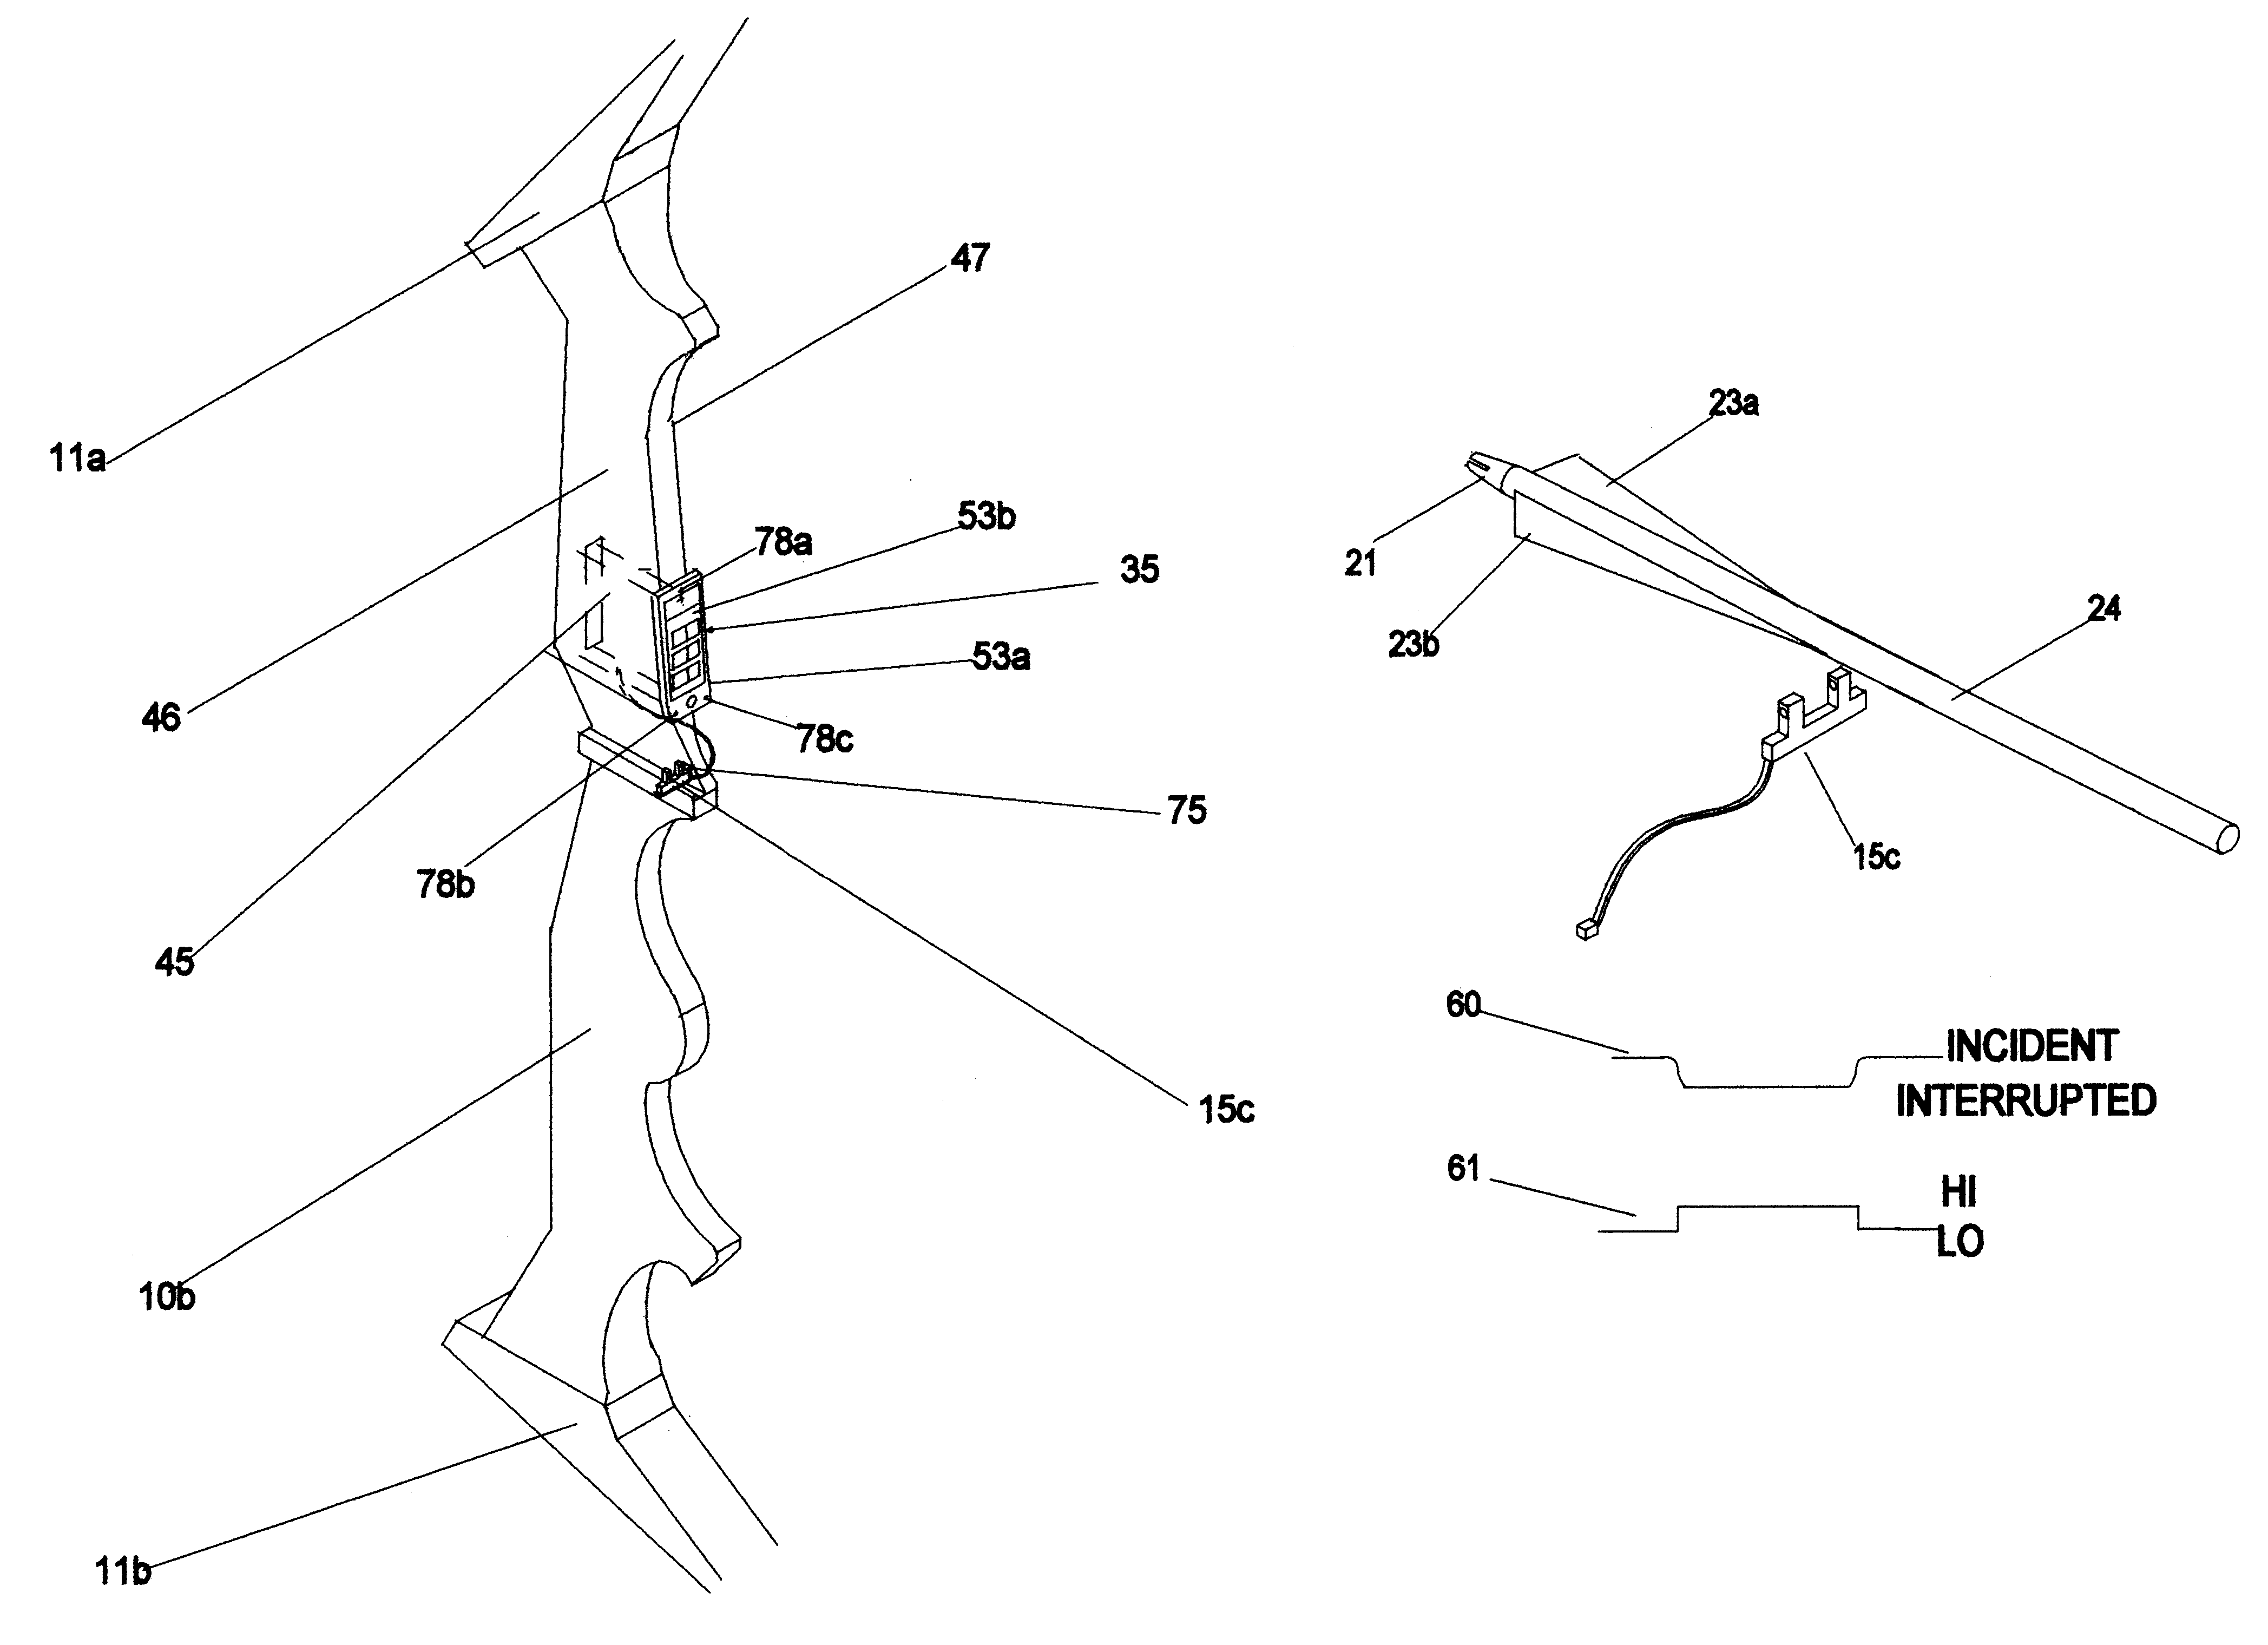 Bow-mounted apparatus for detection and quantification of deviations in dynamic arrow position